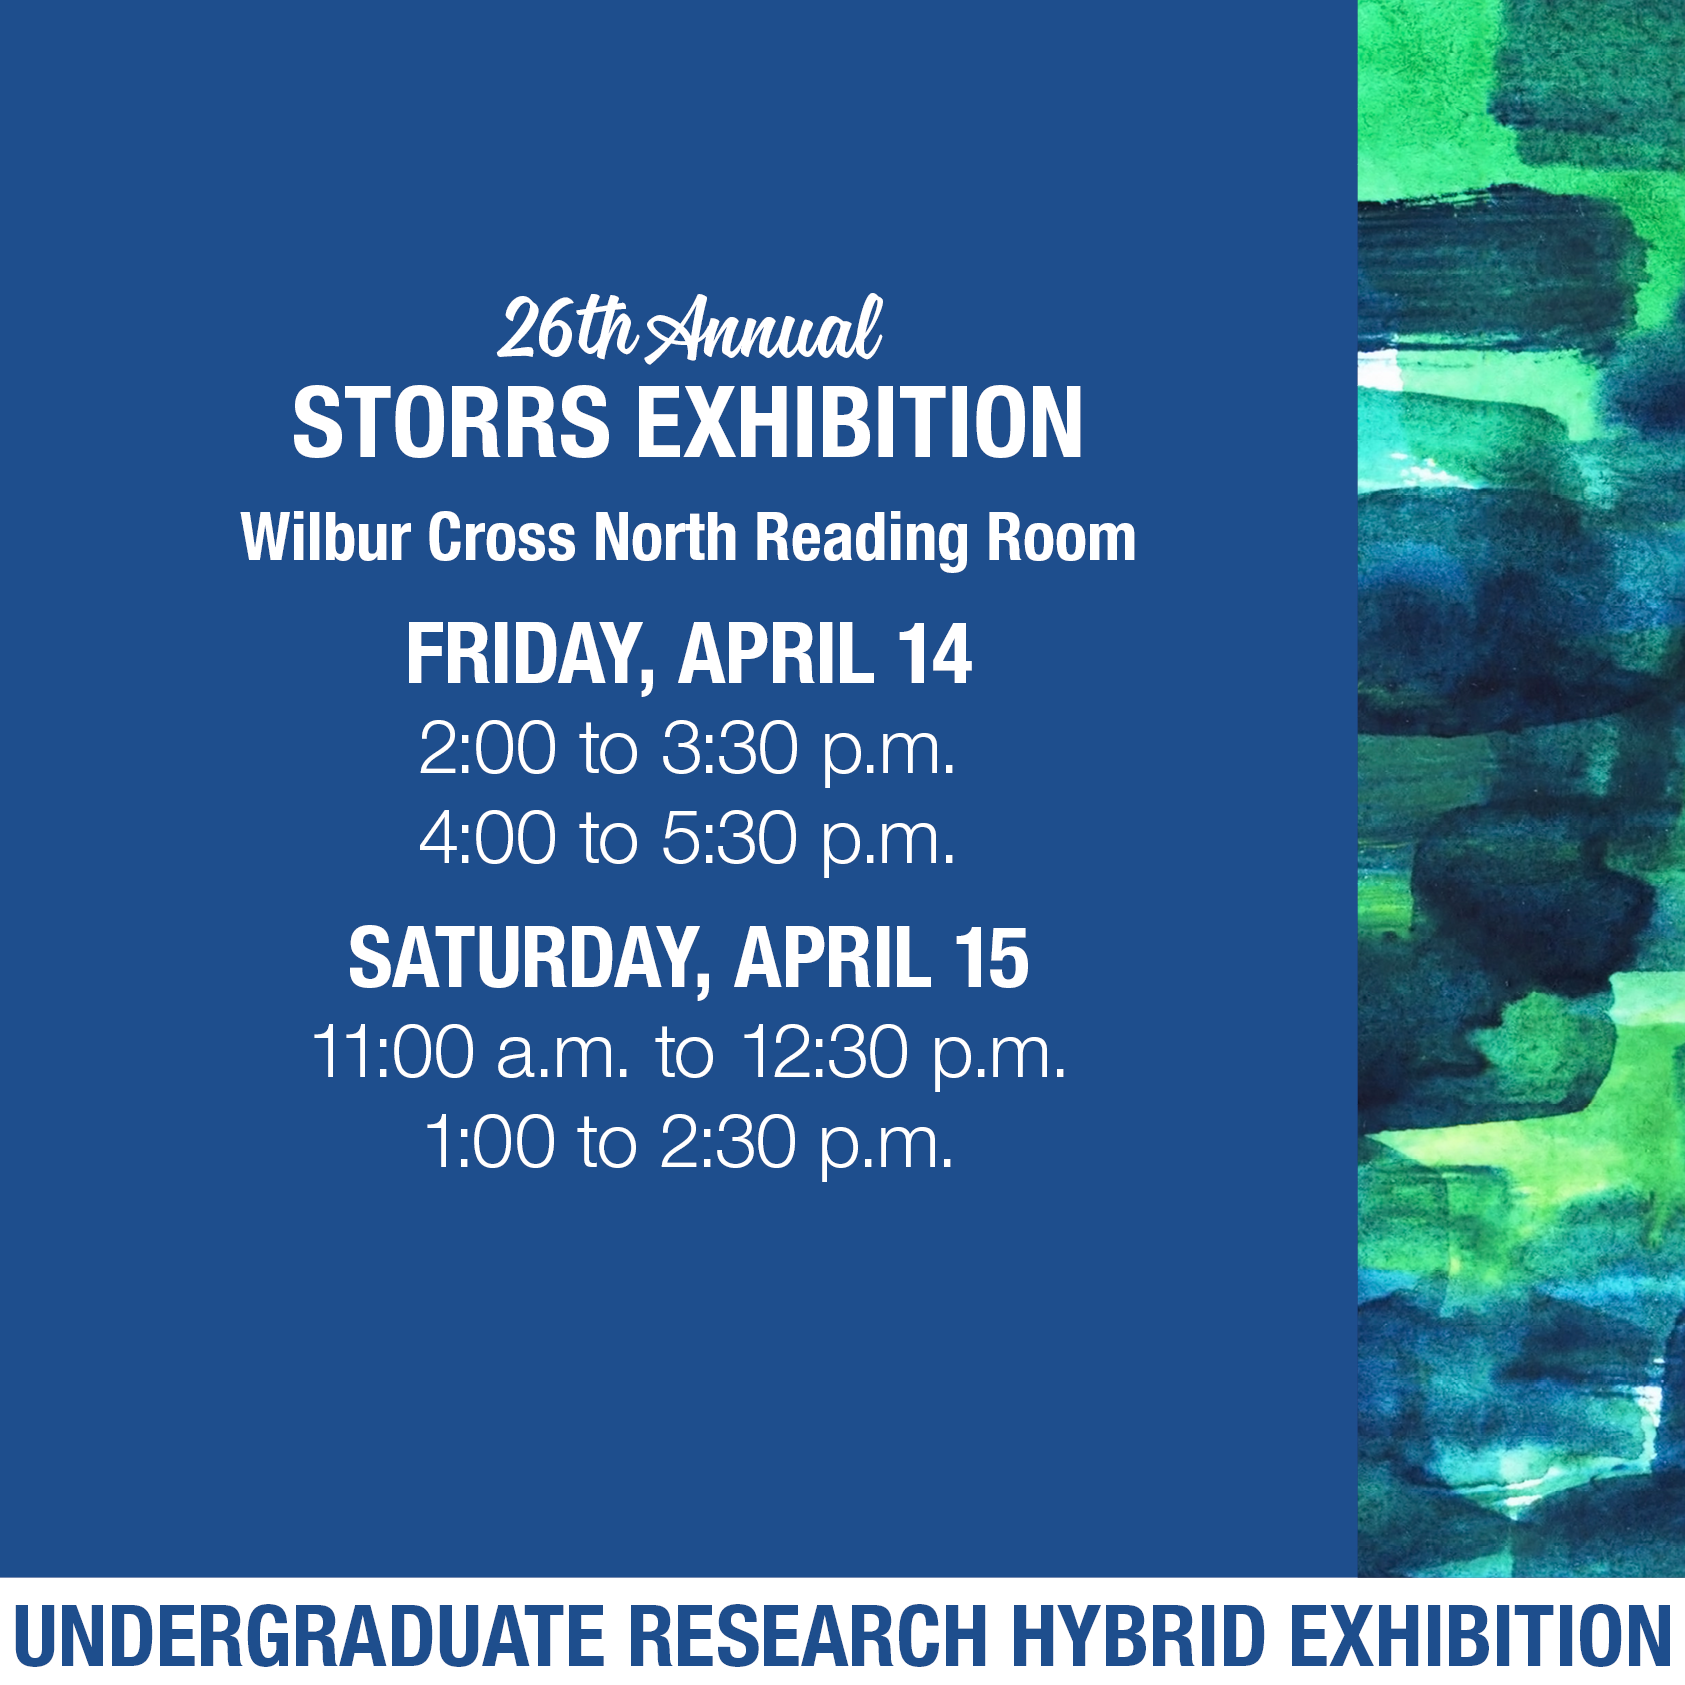 Over a blue background, text reads 26th Annual Storrs Exhibition, Wilbur Cross North Reading Room, Friday, April 14, 2:00 to 3:30pm, 4:00 to 5:30pm, Saturday, April 15, 11:00am to 12:30pm, 1:00 to 2:30pm. Undergraduate Research Hybrid Exhibition. Along the right side, there is a vertical band with a watercolor background of overlapping green and blue brushstrokes.